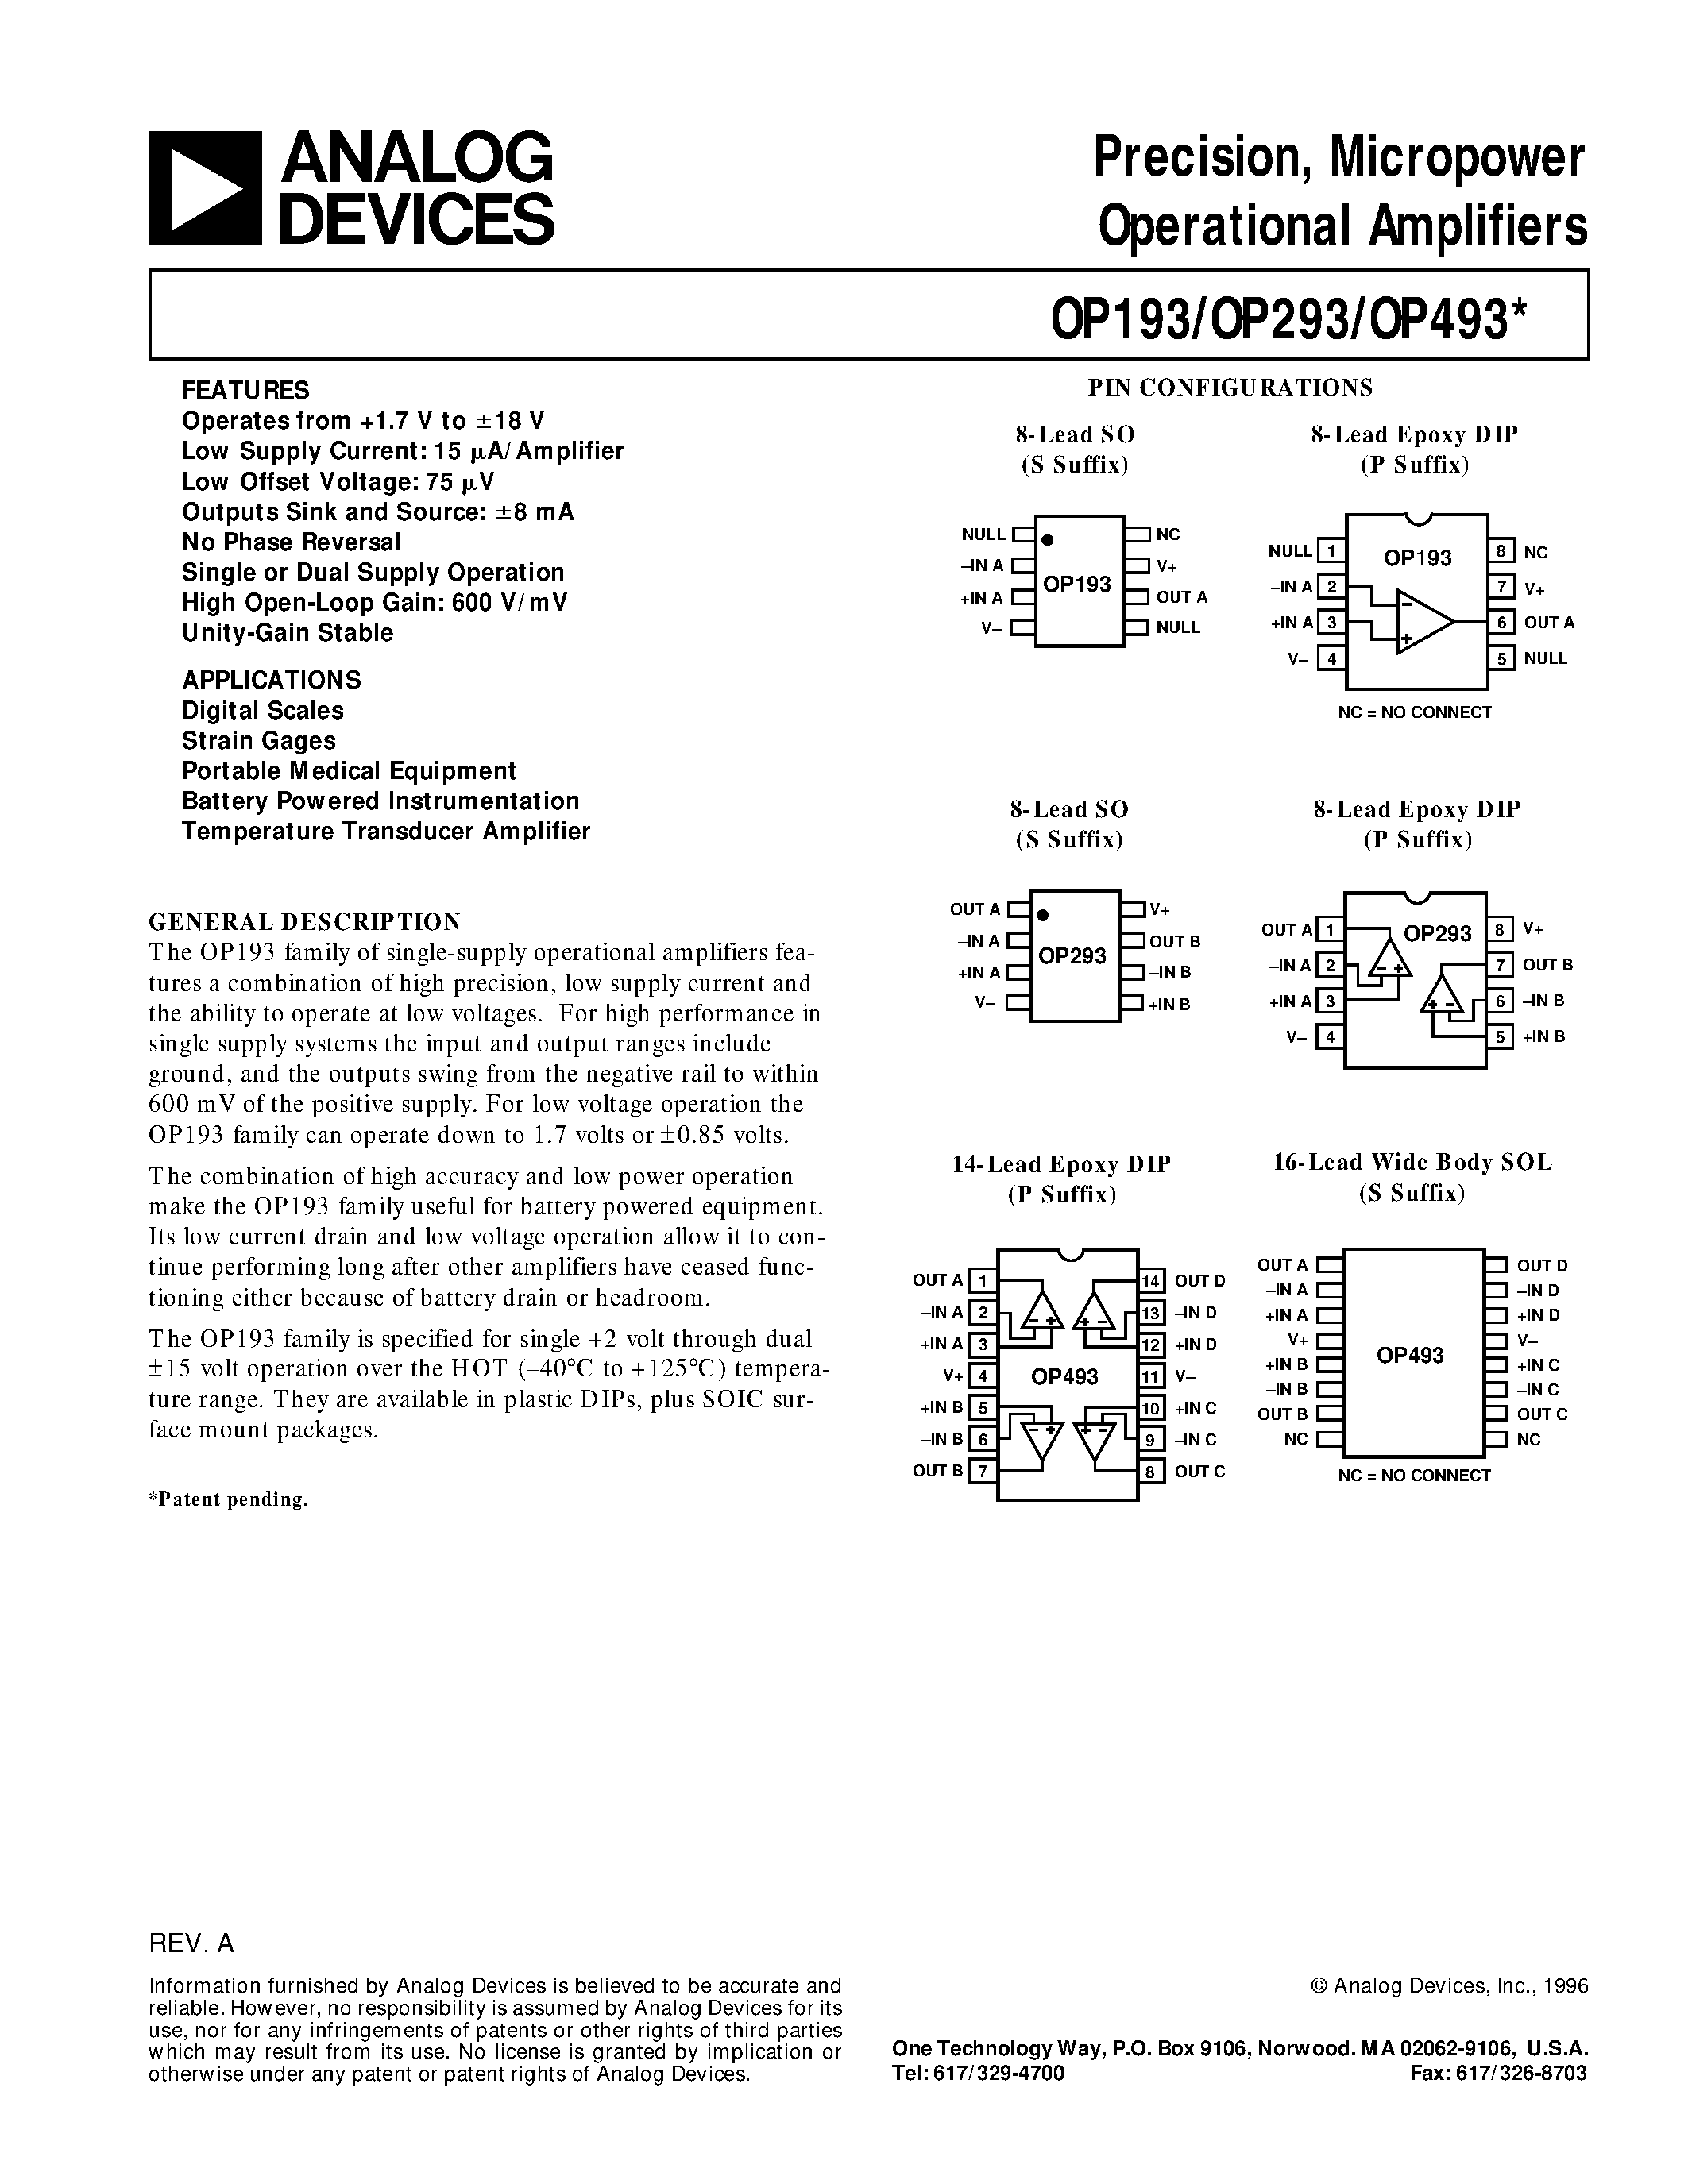 Datasheet OP293 - Precision / Micropower Operational Amplifiers page 1